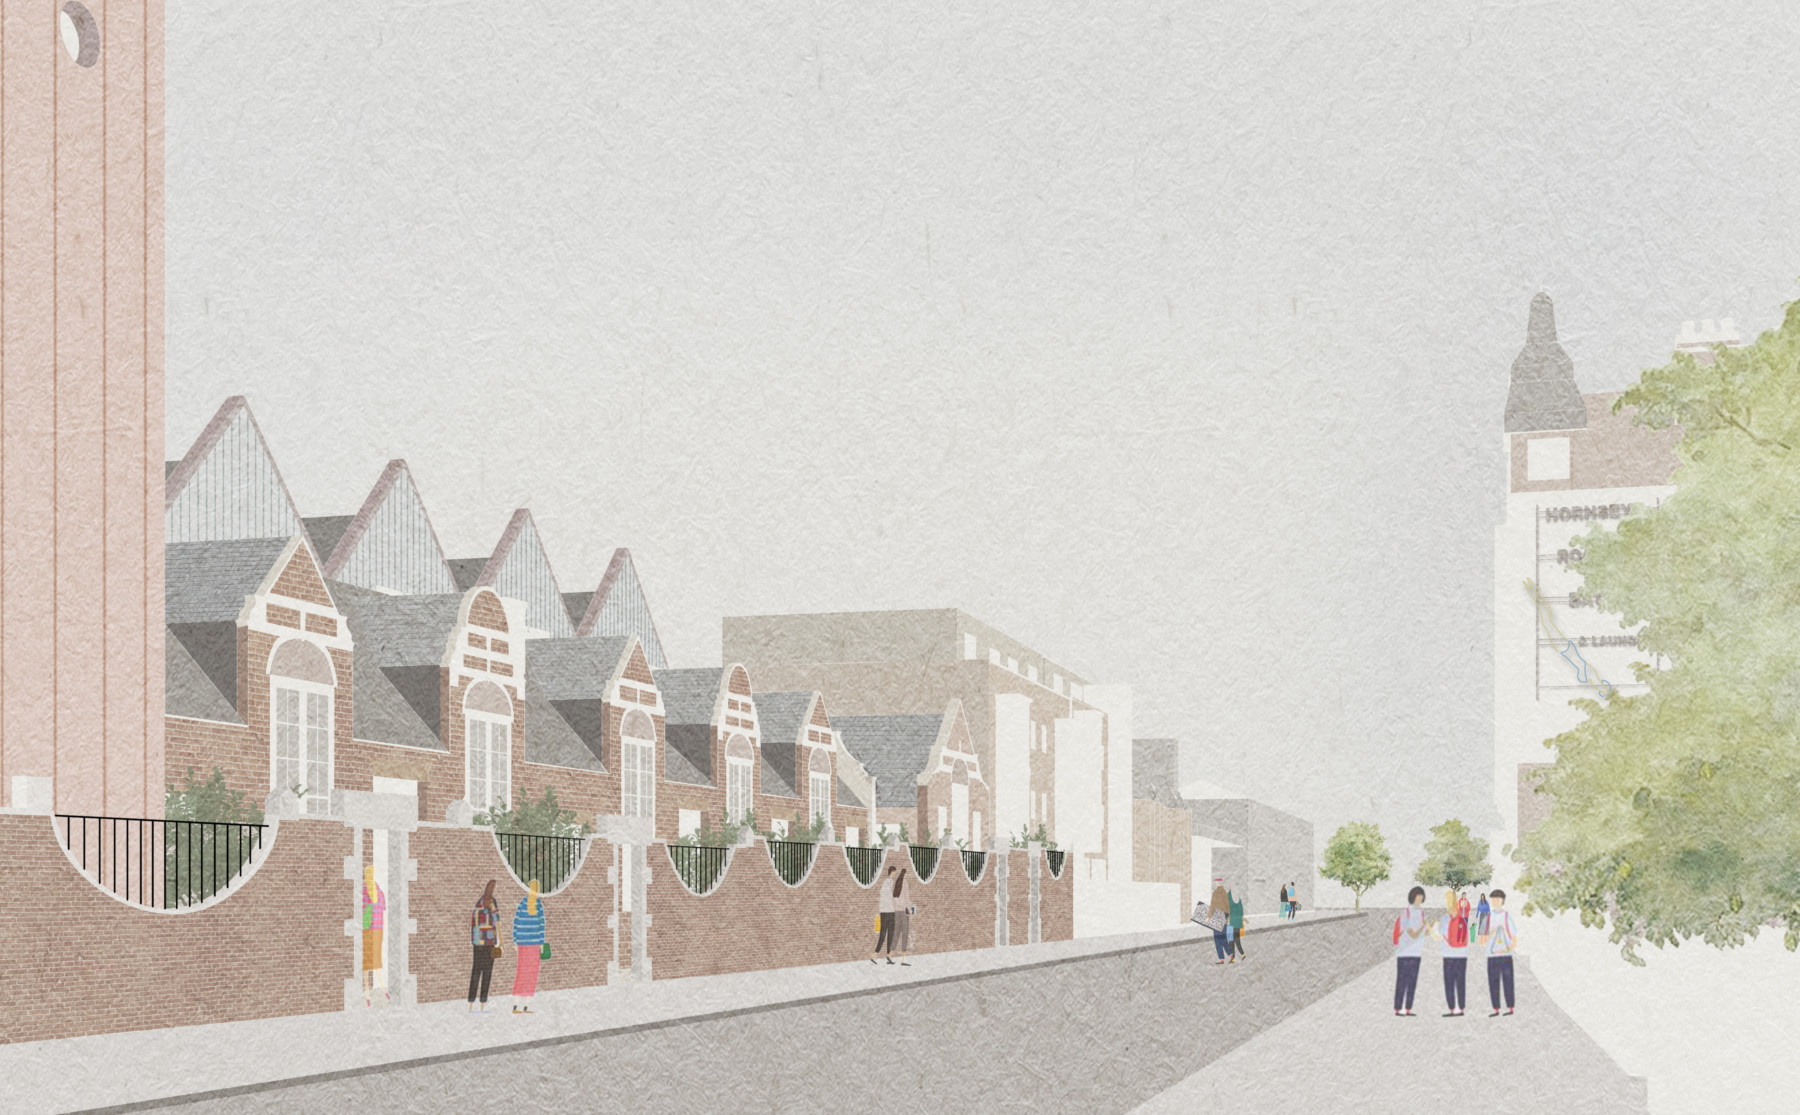 179 Hornsey Road - RCKa - Sketch View from South